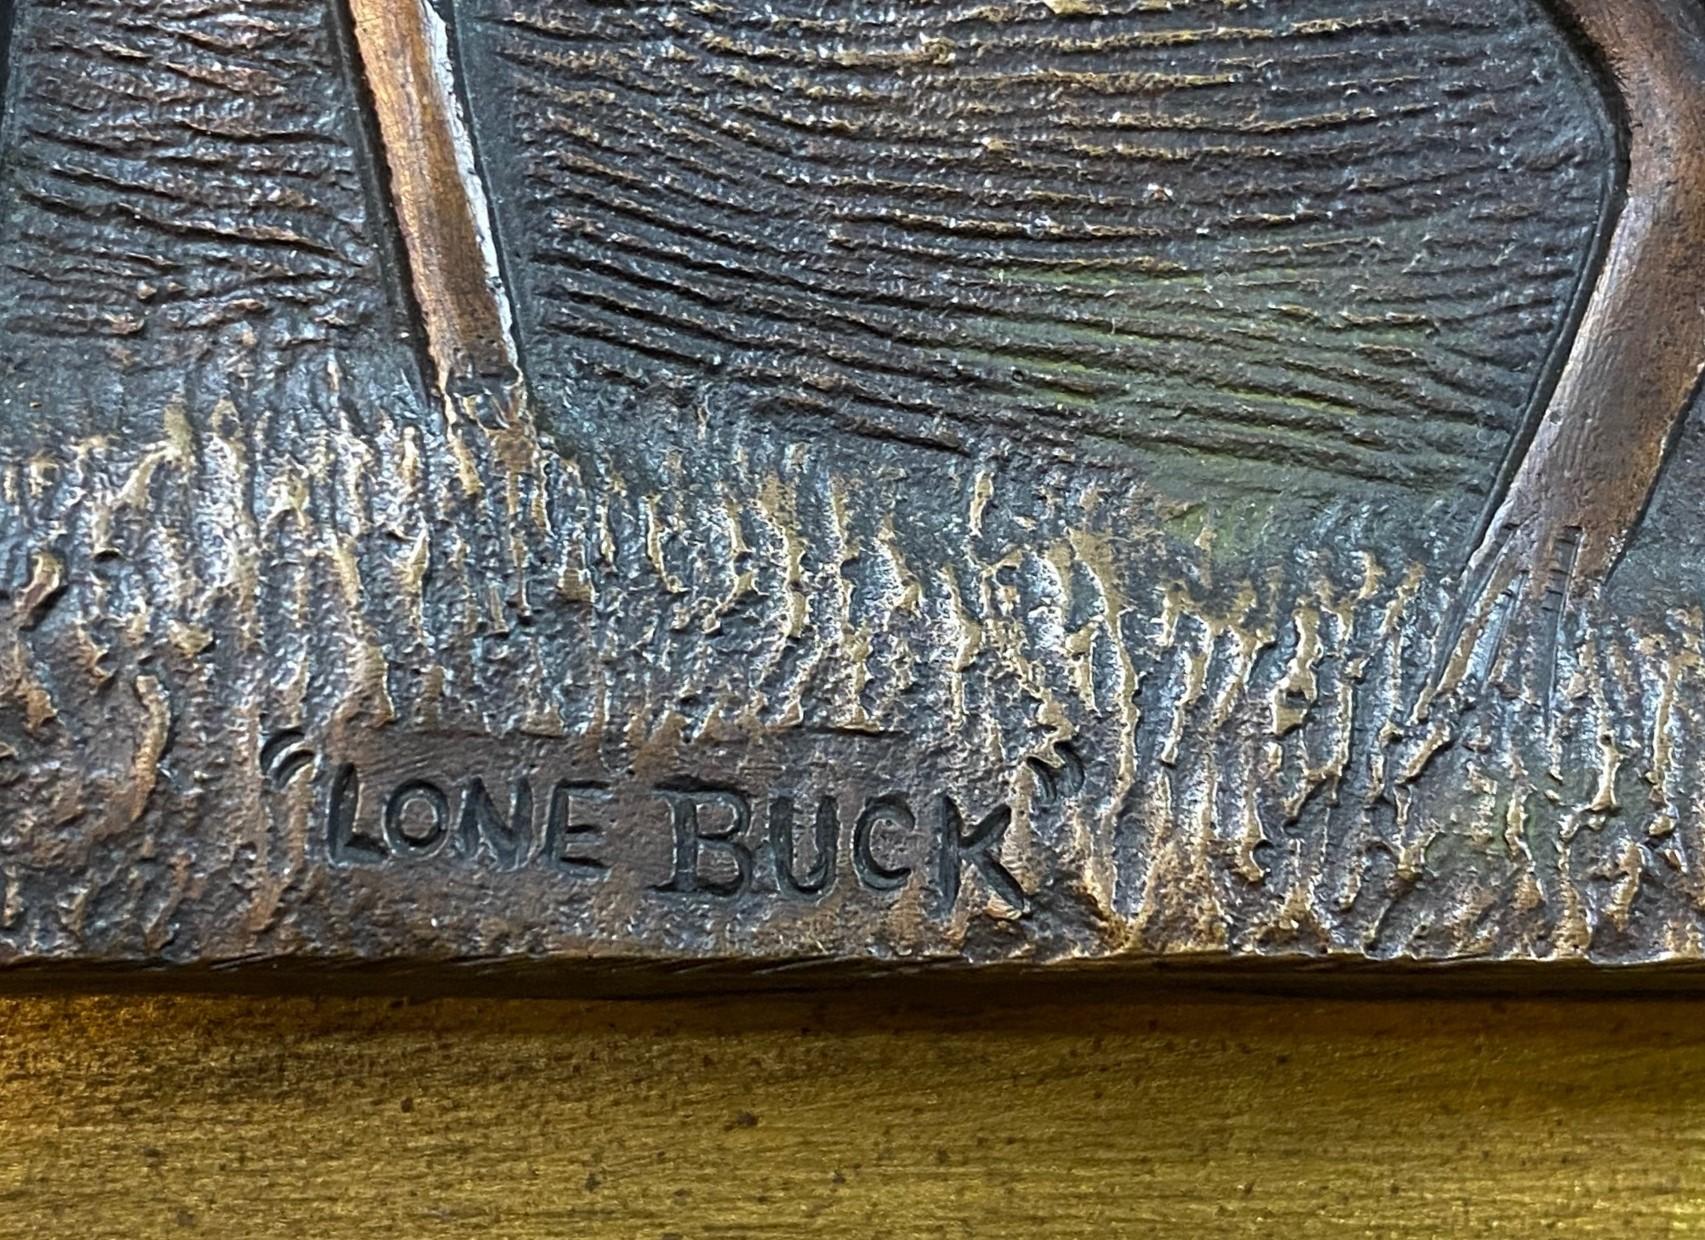 Late 20th Century R M Evans Signed Limited Edition Bronze Wall Relief Plaque Sculpture Lone Buck For Sale